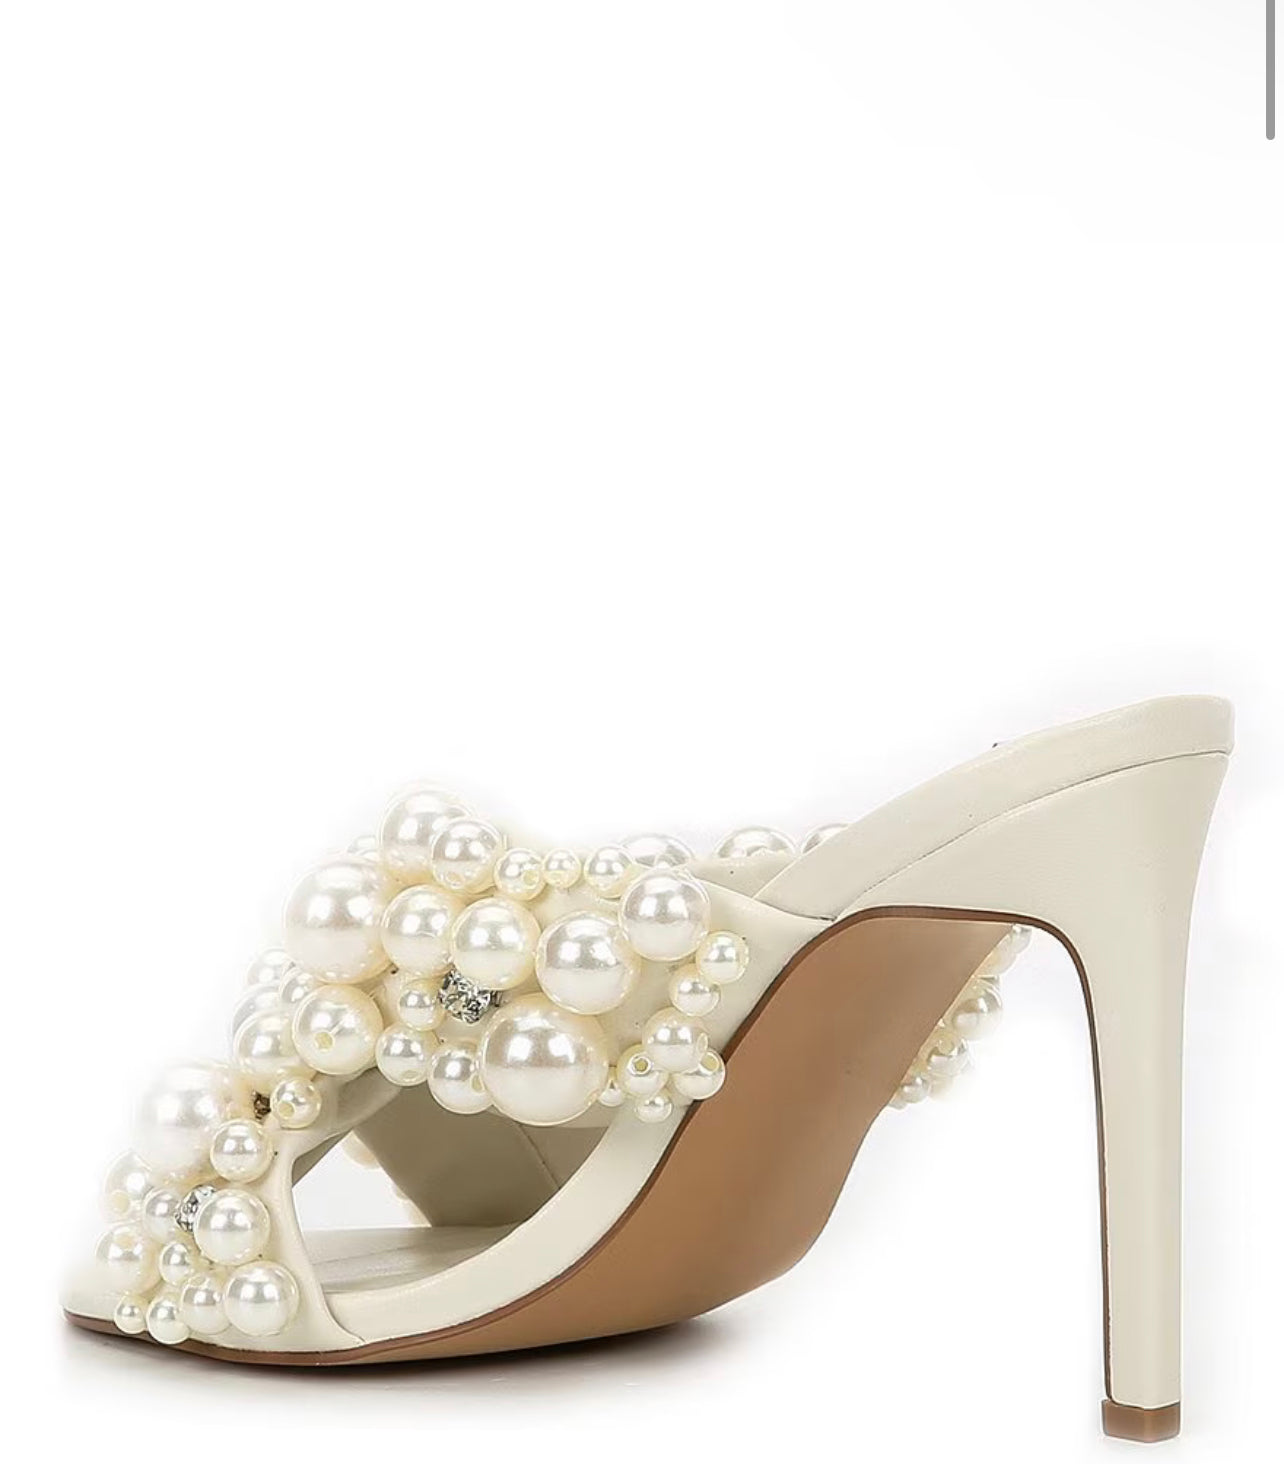 Steve Madden Mirabella Leather and Pearl Heel